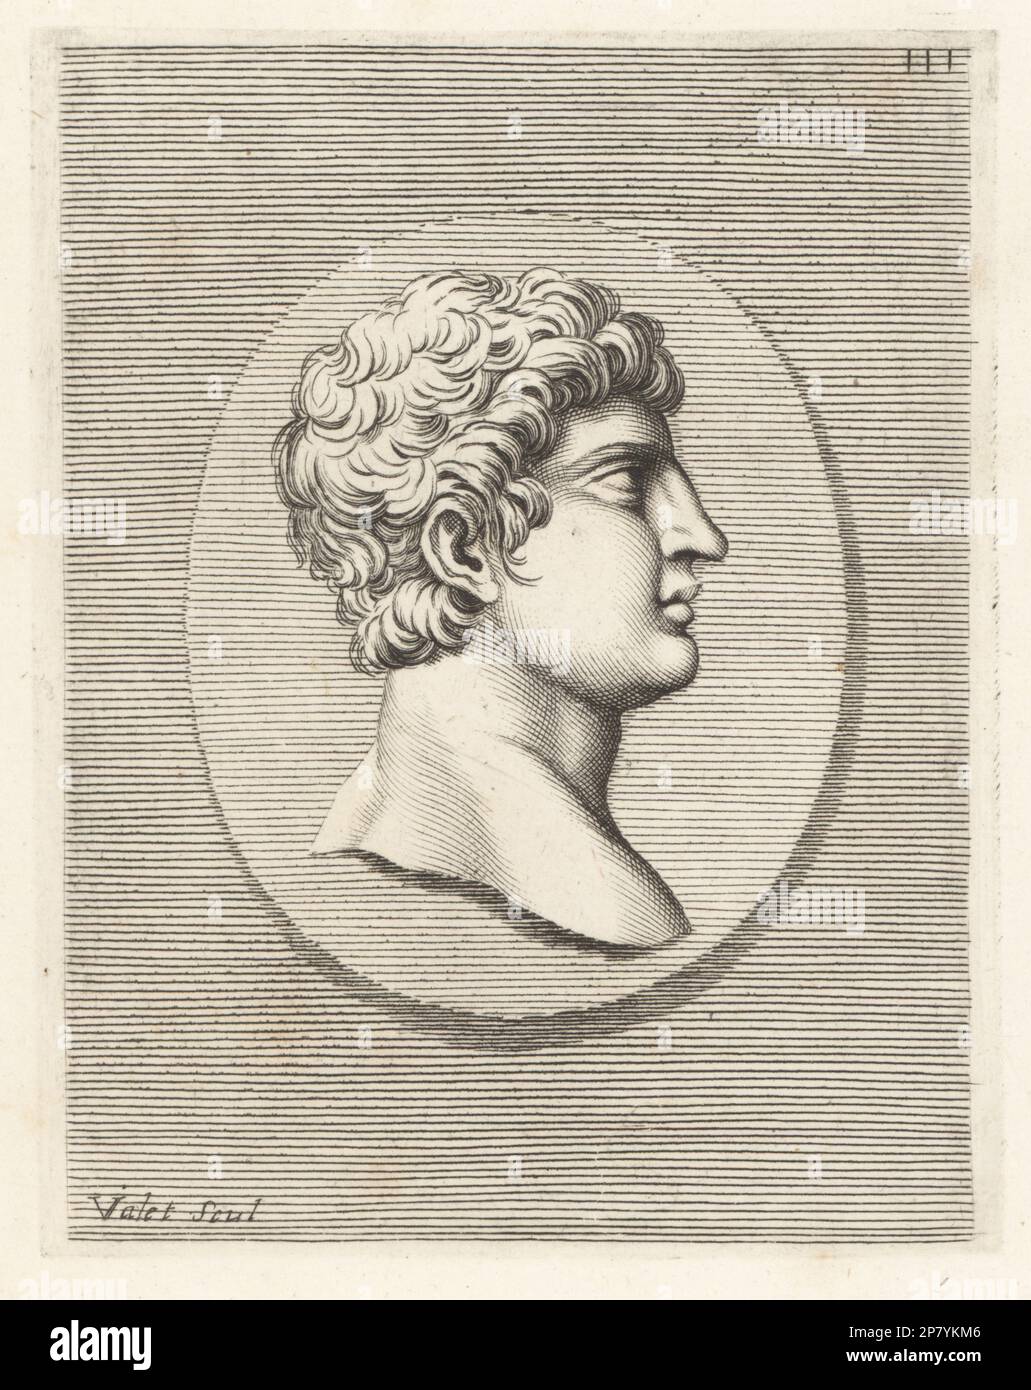 Head of a young man with short curly hair. From an oval antique gem. Copperplate engraving by Guillaume Vallet after Giovanni Angelo Canini from Iconografia, cioe disegni d'imagini de famosissimi monarchi, regi, filososi, poeti ed oratori dell' Antichita, Drawings of images of famous monarchs, kings, philosophers, poets and orators of Antiquity, Ignatio de’Lazari, Rome, 1699. Stock Photo